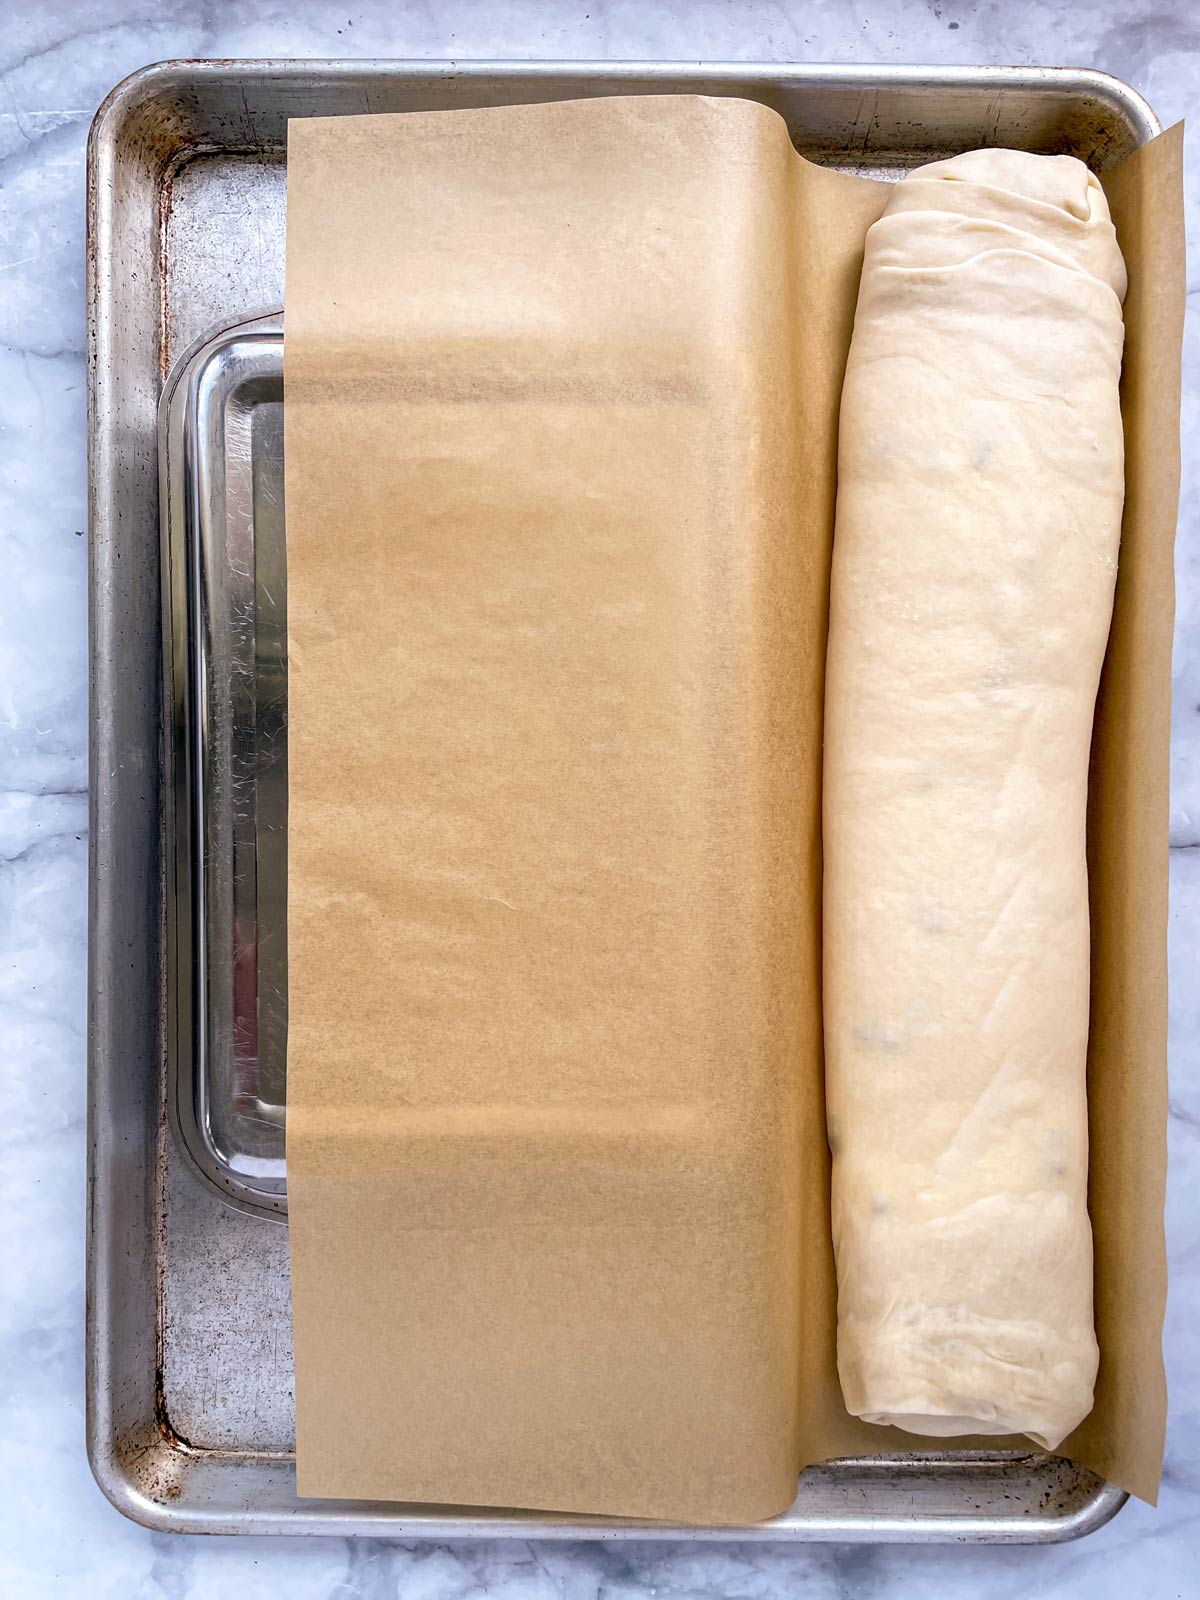 An unbaked strudel penned between the edge of a sheet pan and an inverted rectangular pan.